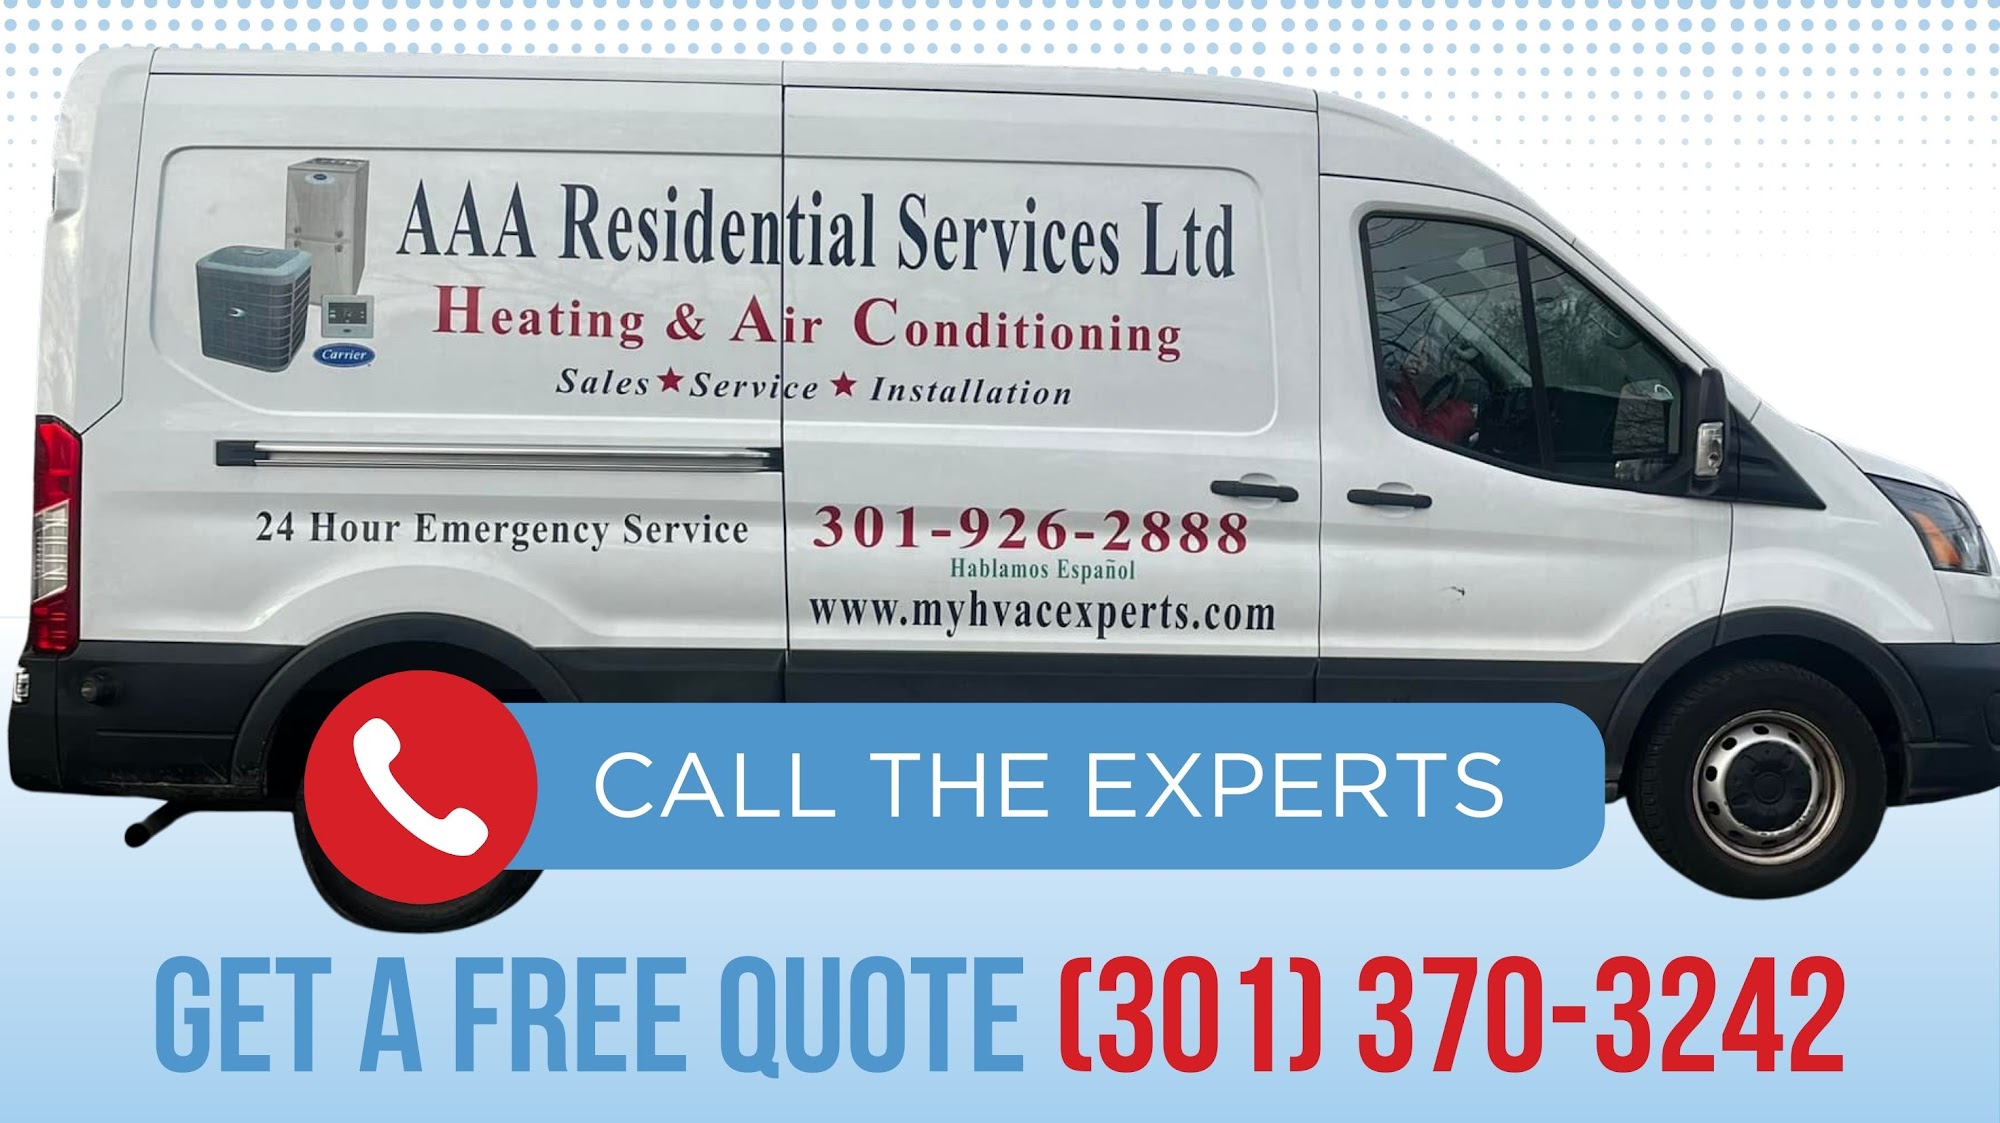 AAA Residential Services Heating & Air Conditioning